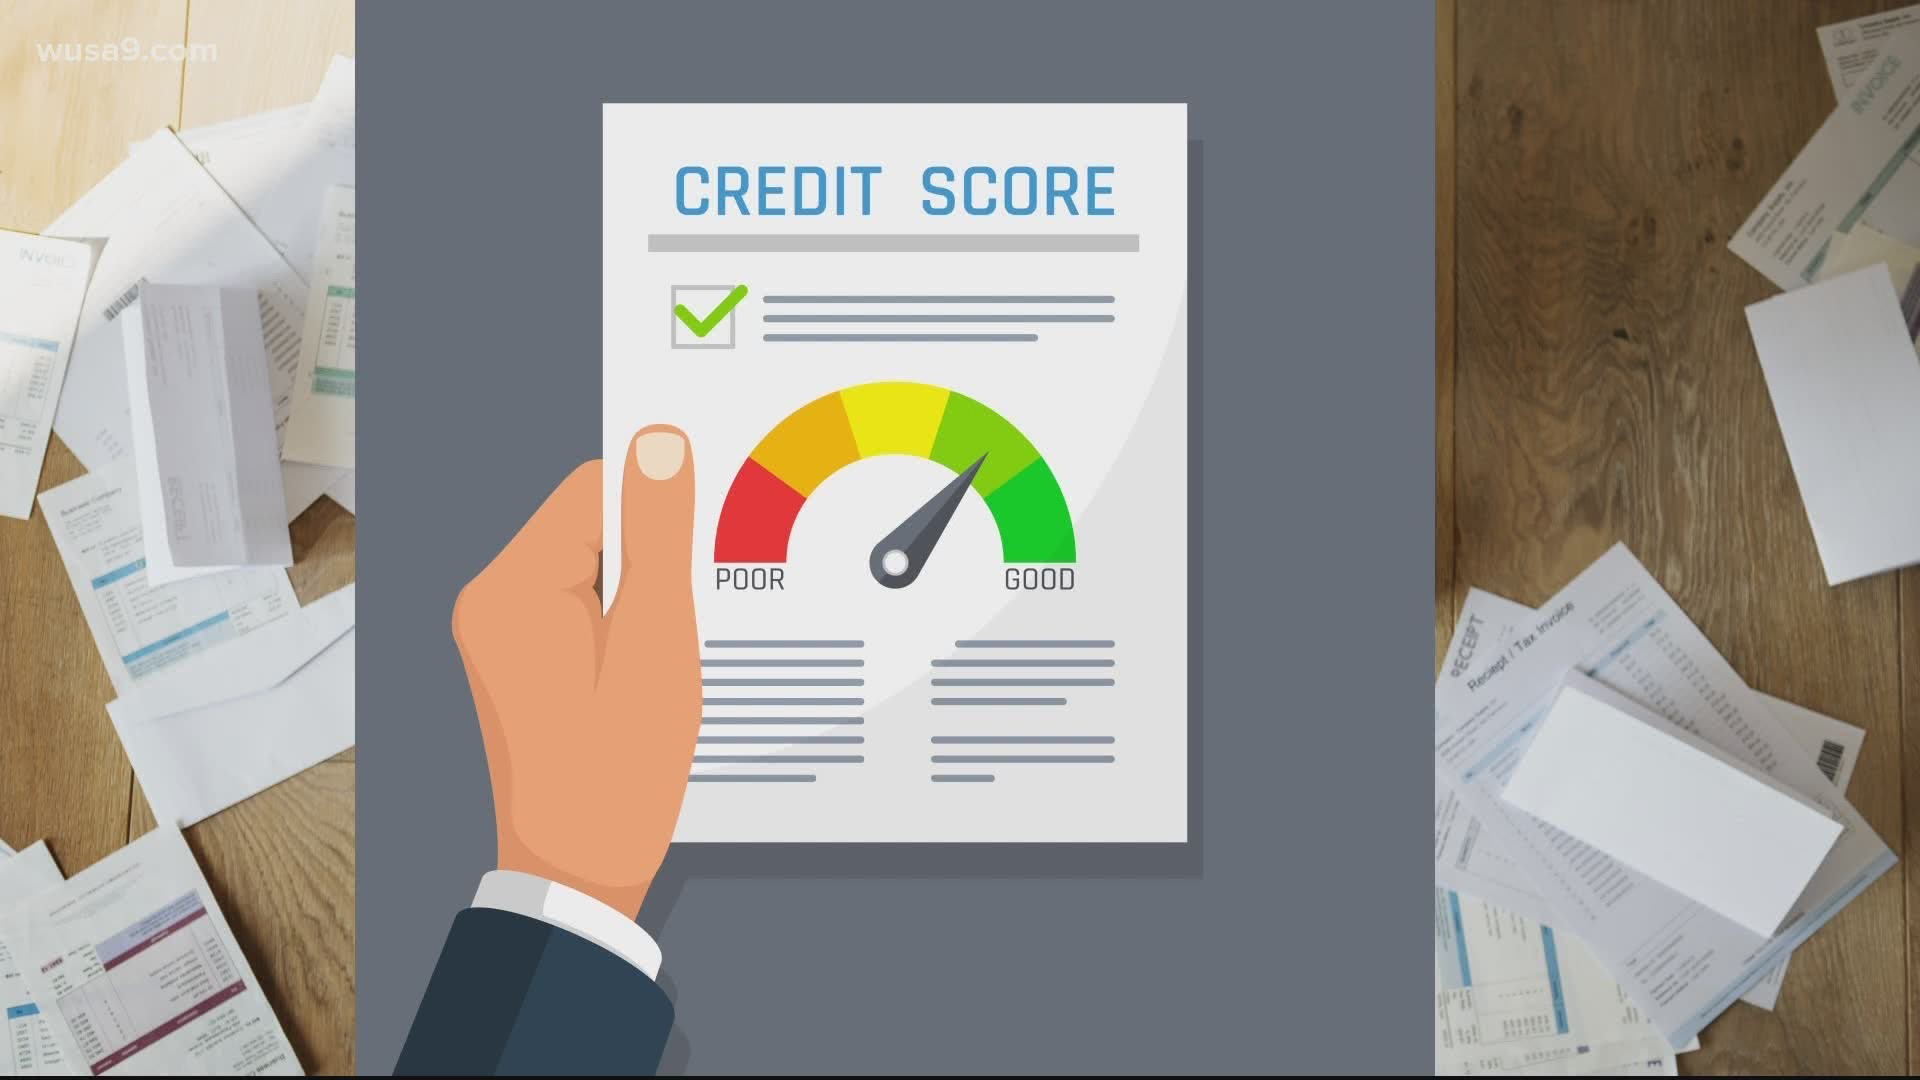 Your credit report doesn’t show if you apply for unemployment benefits or your employment history, our Verify experts say.